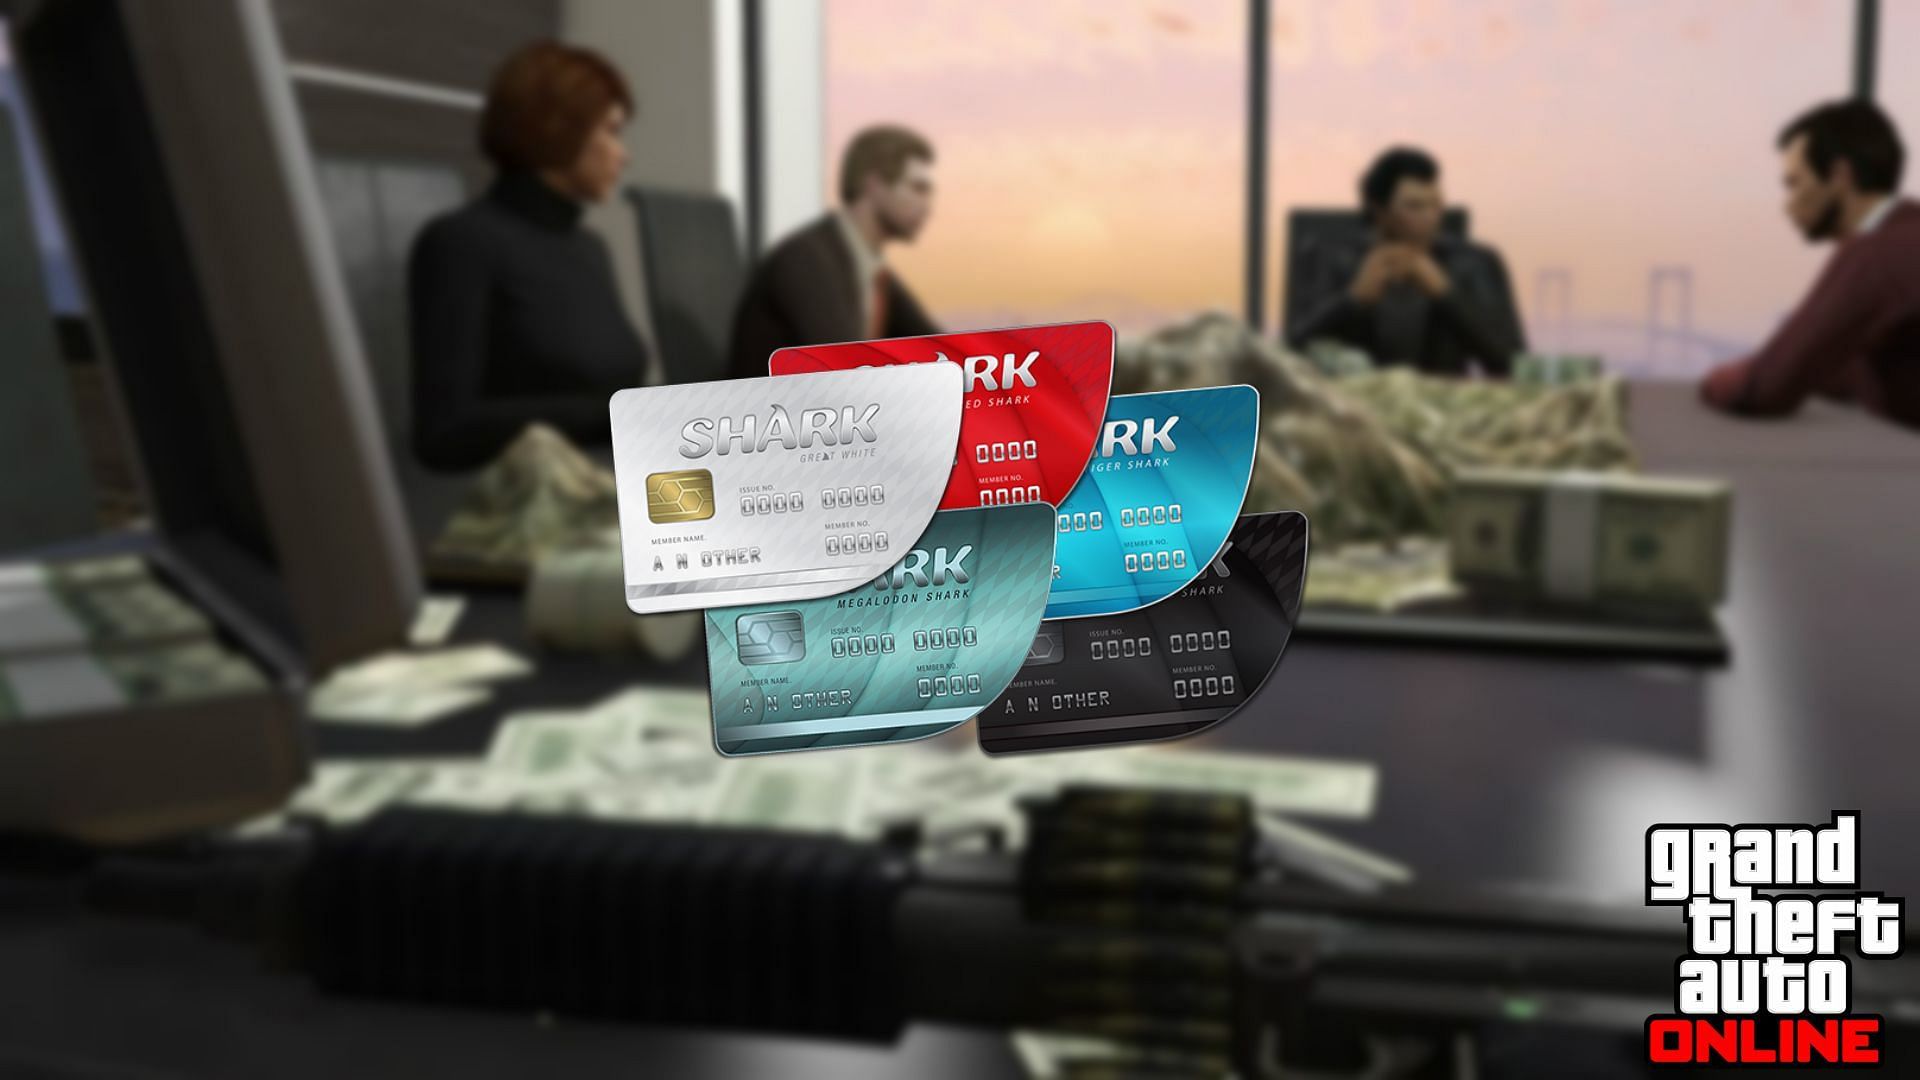 Are Shark Cards the only thing that Rockstar cares about? (Image via Sportskeeda)